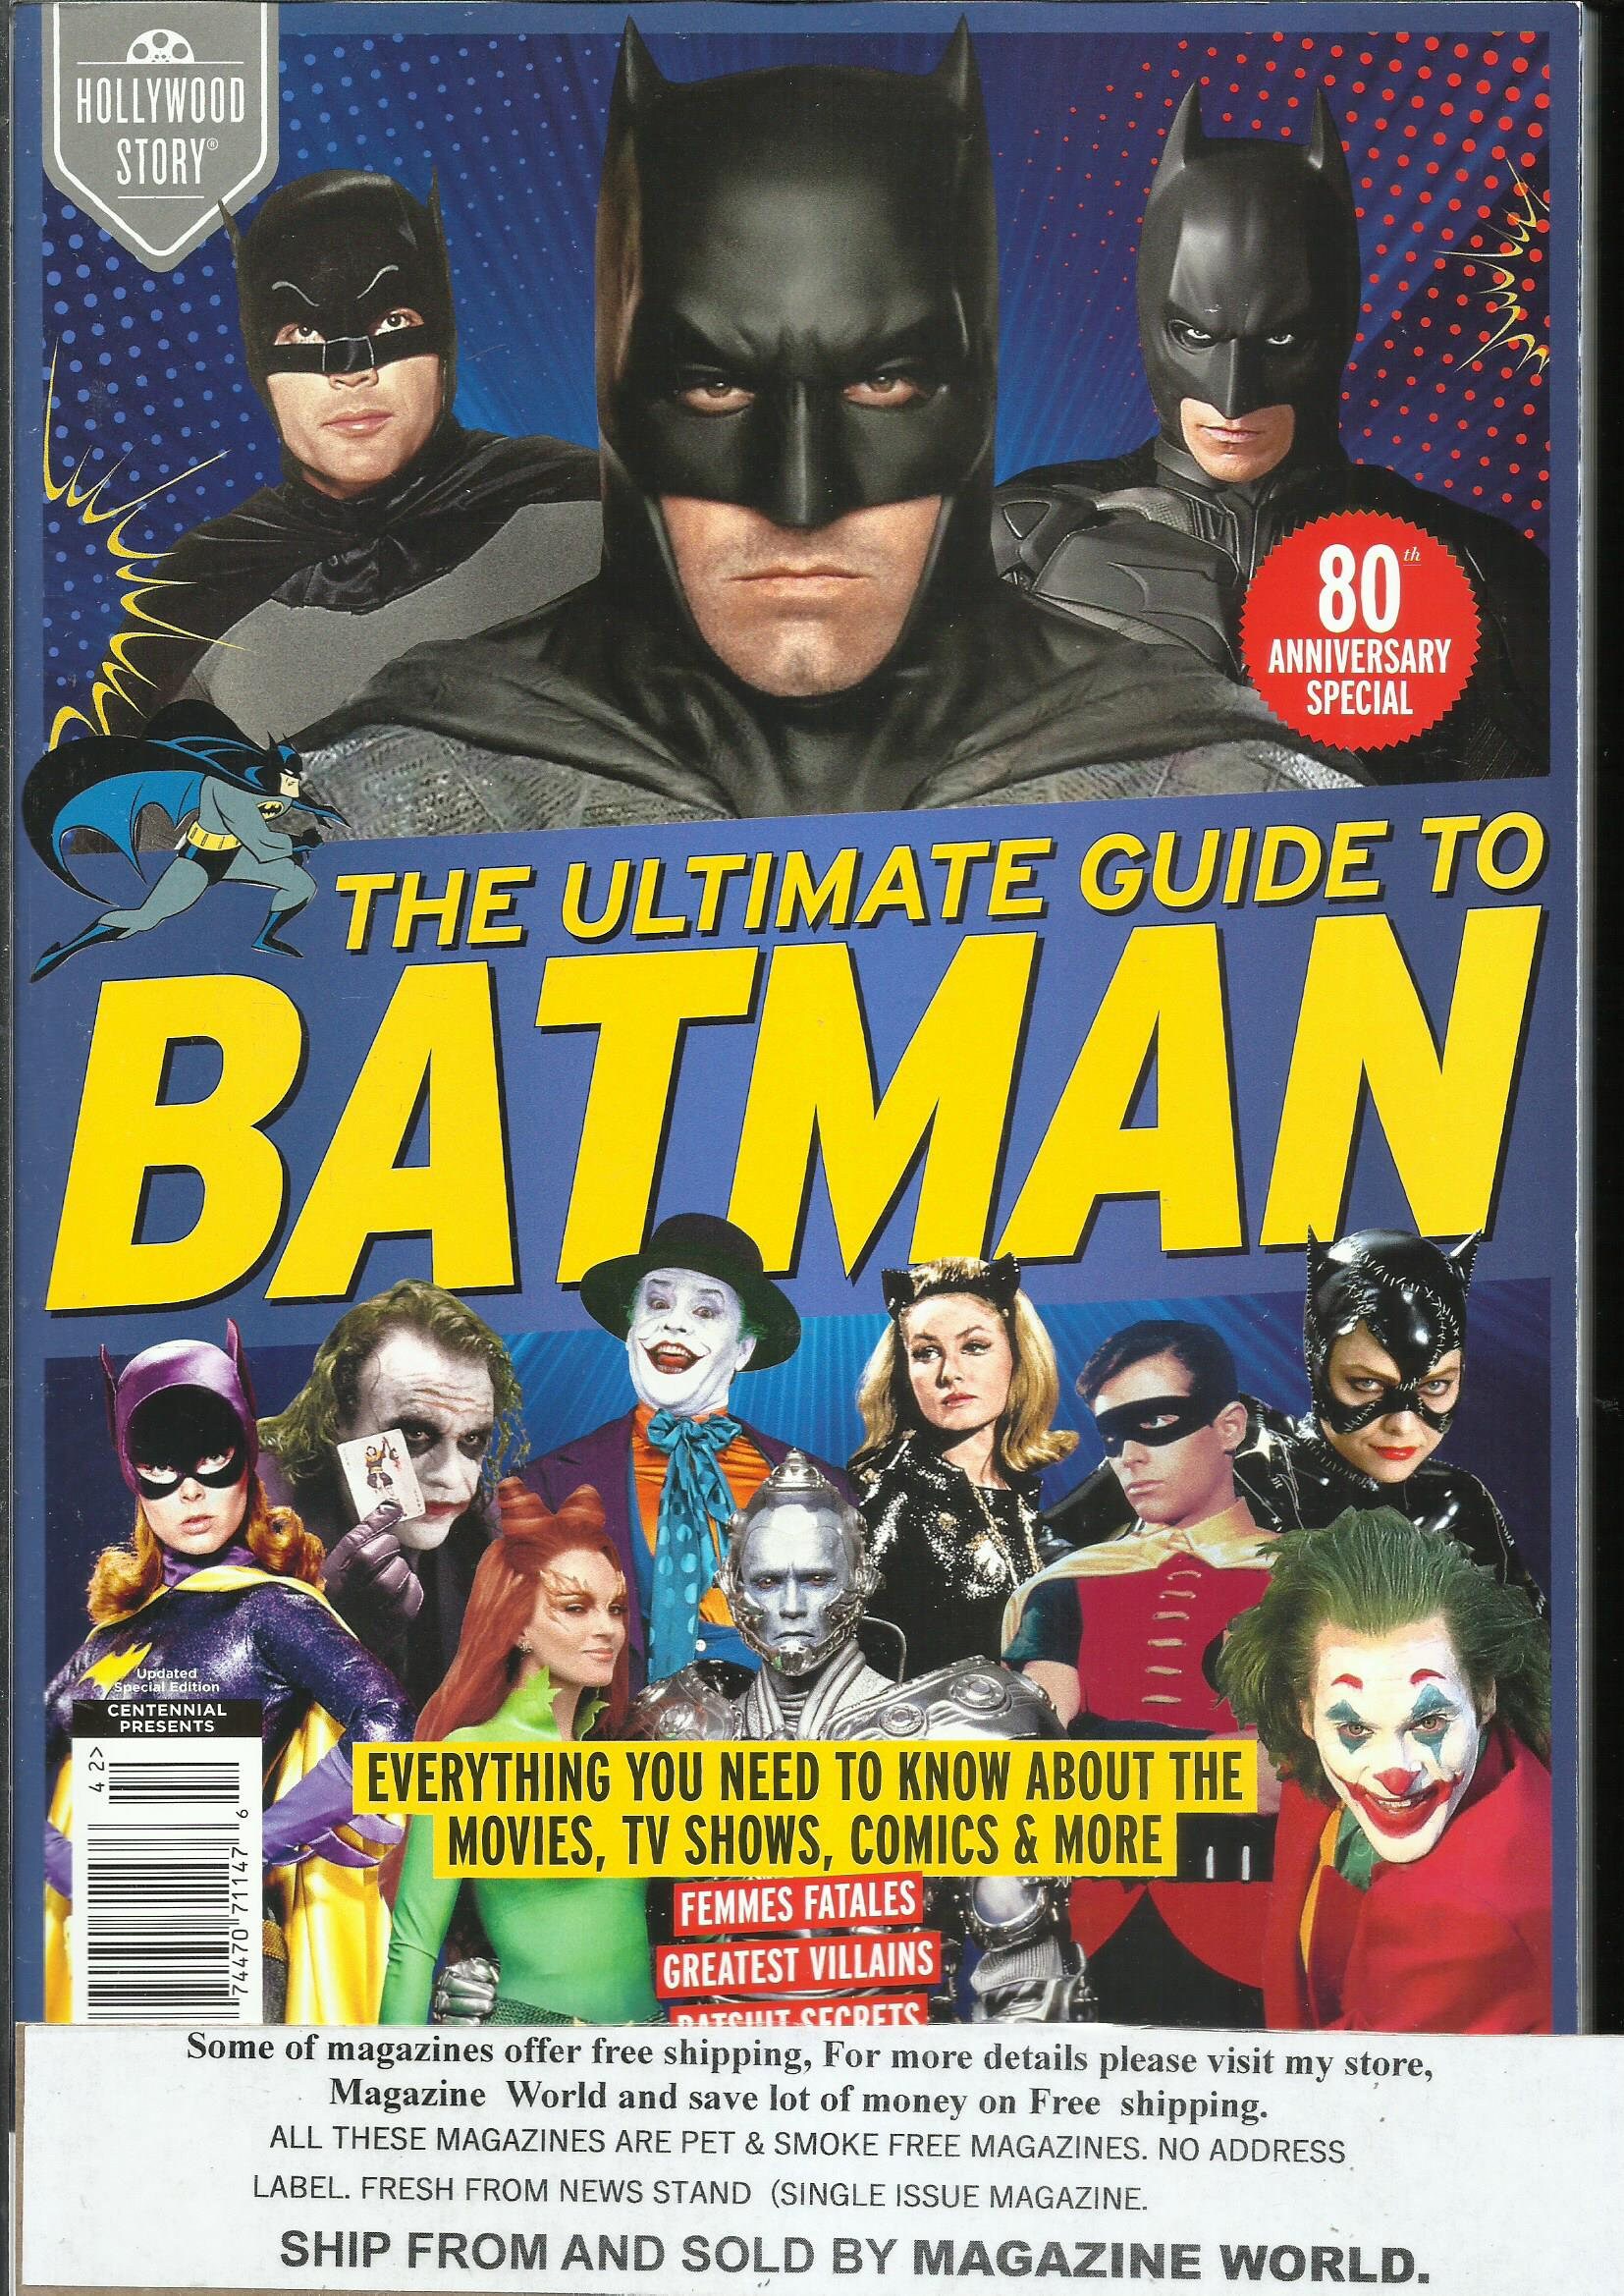 The Ultimate Guide to Batman Magazine hollywood Story - Etsy